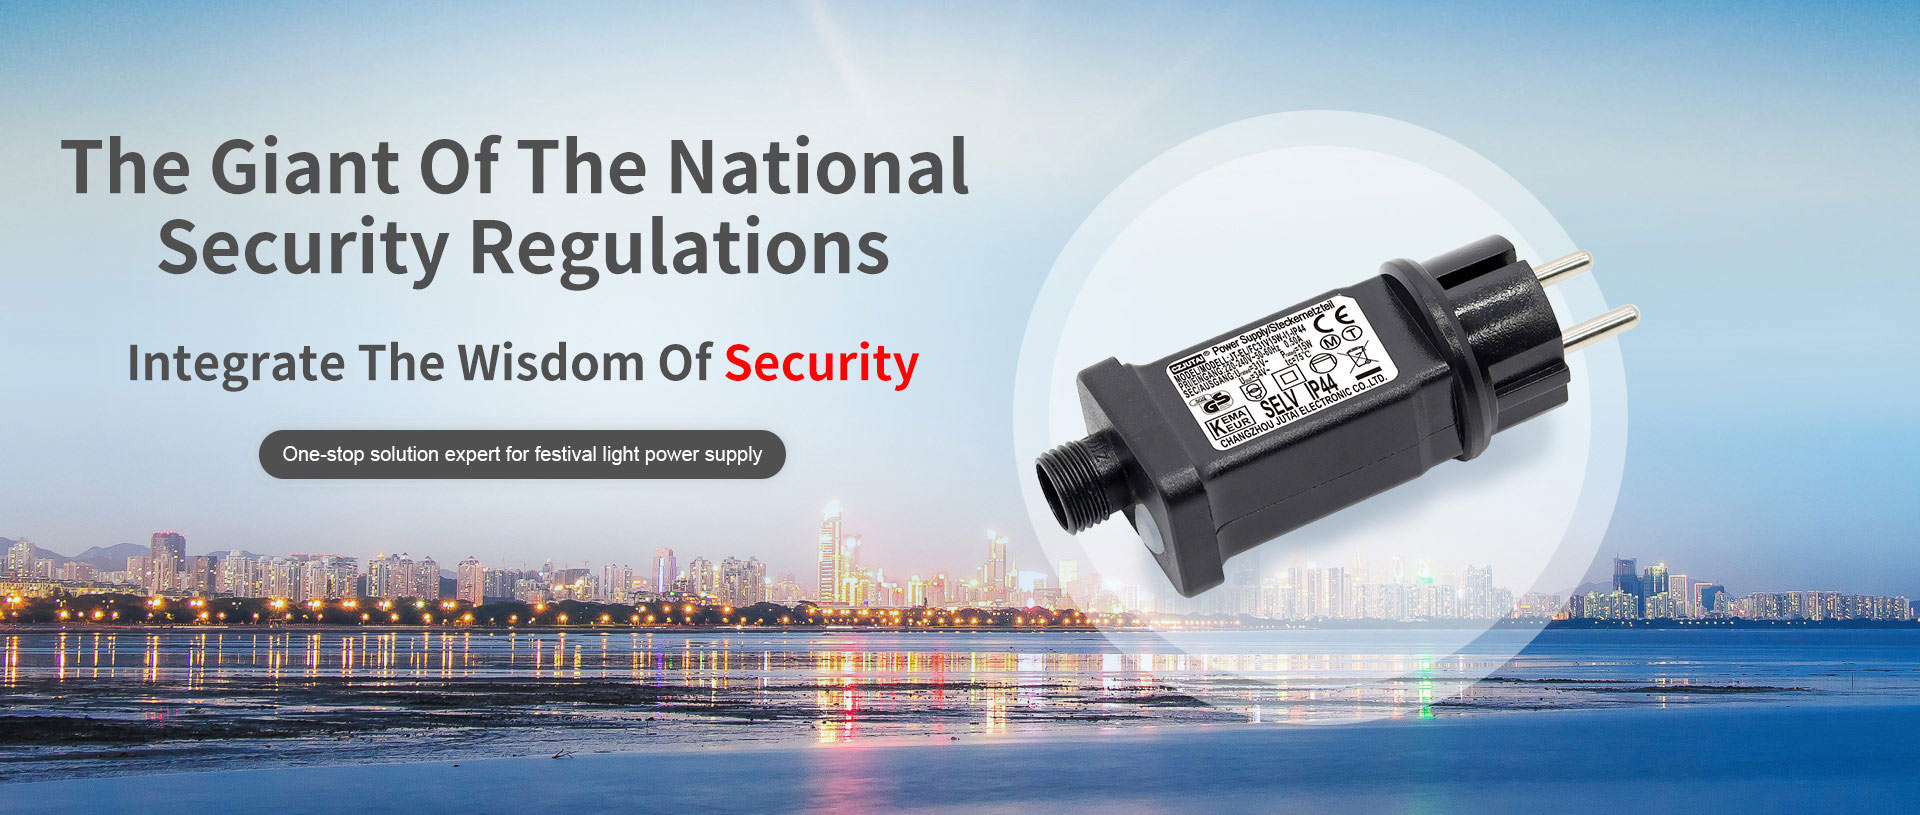 The giant of the national security regulations, integrate the wisdom of security